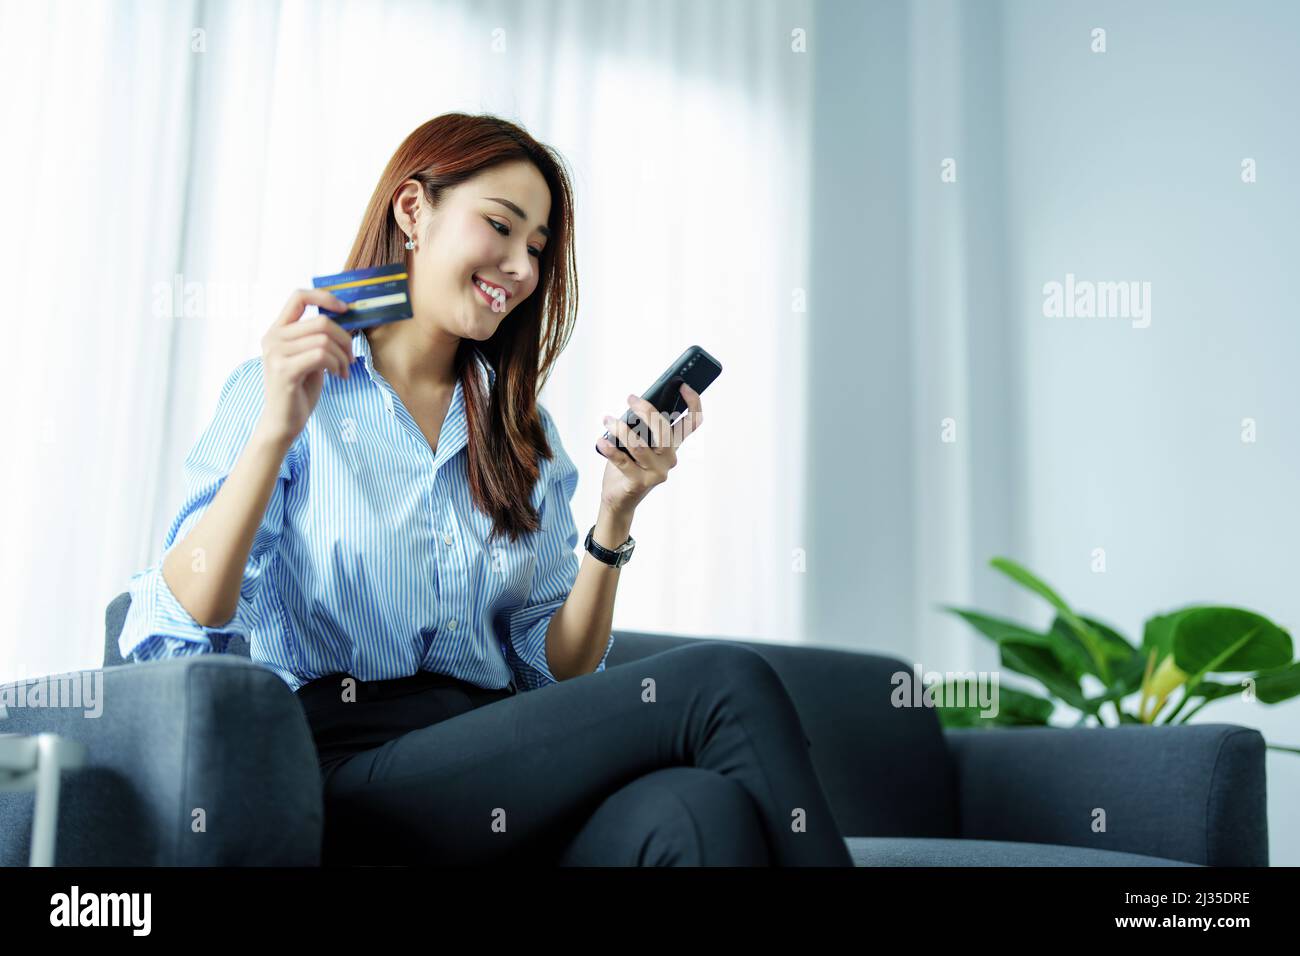 Online Shopping and Internet Payments, Portrait of Asian woman are using their mobile phones and credit cards to shop online or conduct errands in the Stock Photo